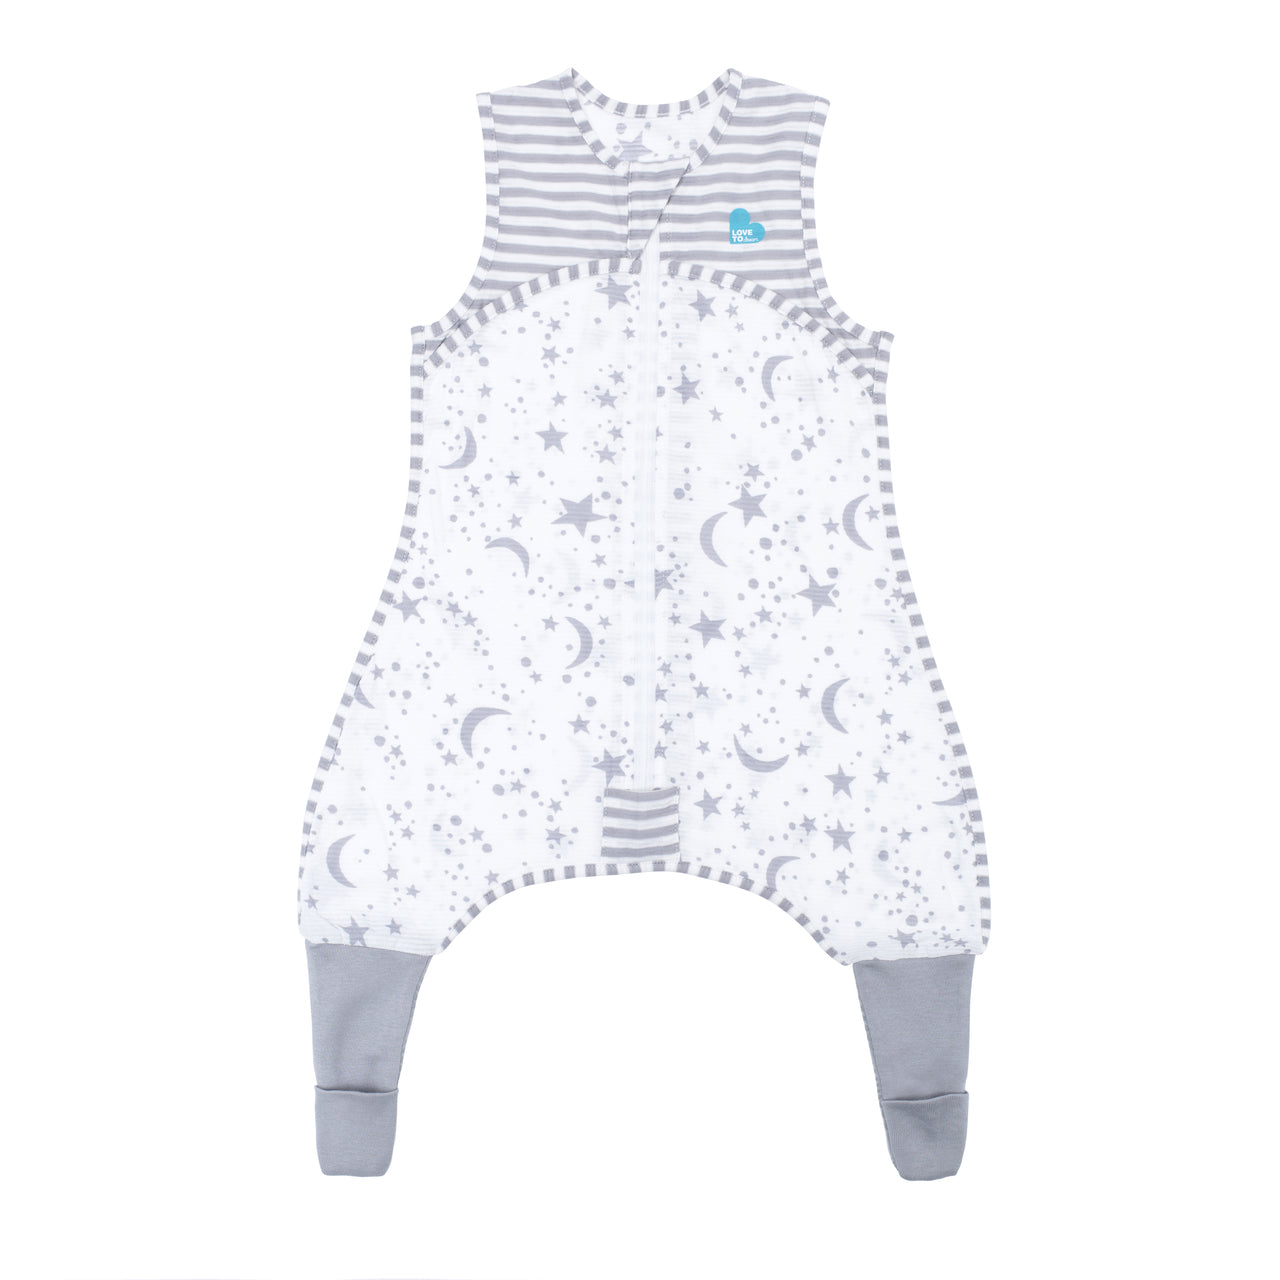 The Love to Dream Sleep Suit Lite is the perfect summer sleepsuit for your growing young one. The ‘2 in 1’ feet can be covered for bedtime or uncovered for playtime. The foot cuffs are made from jersey-knit cotton for extra snugness and feature anti-slip dots for safer play.